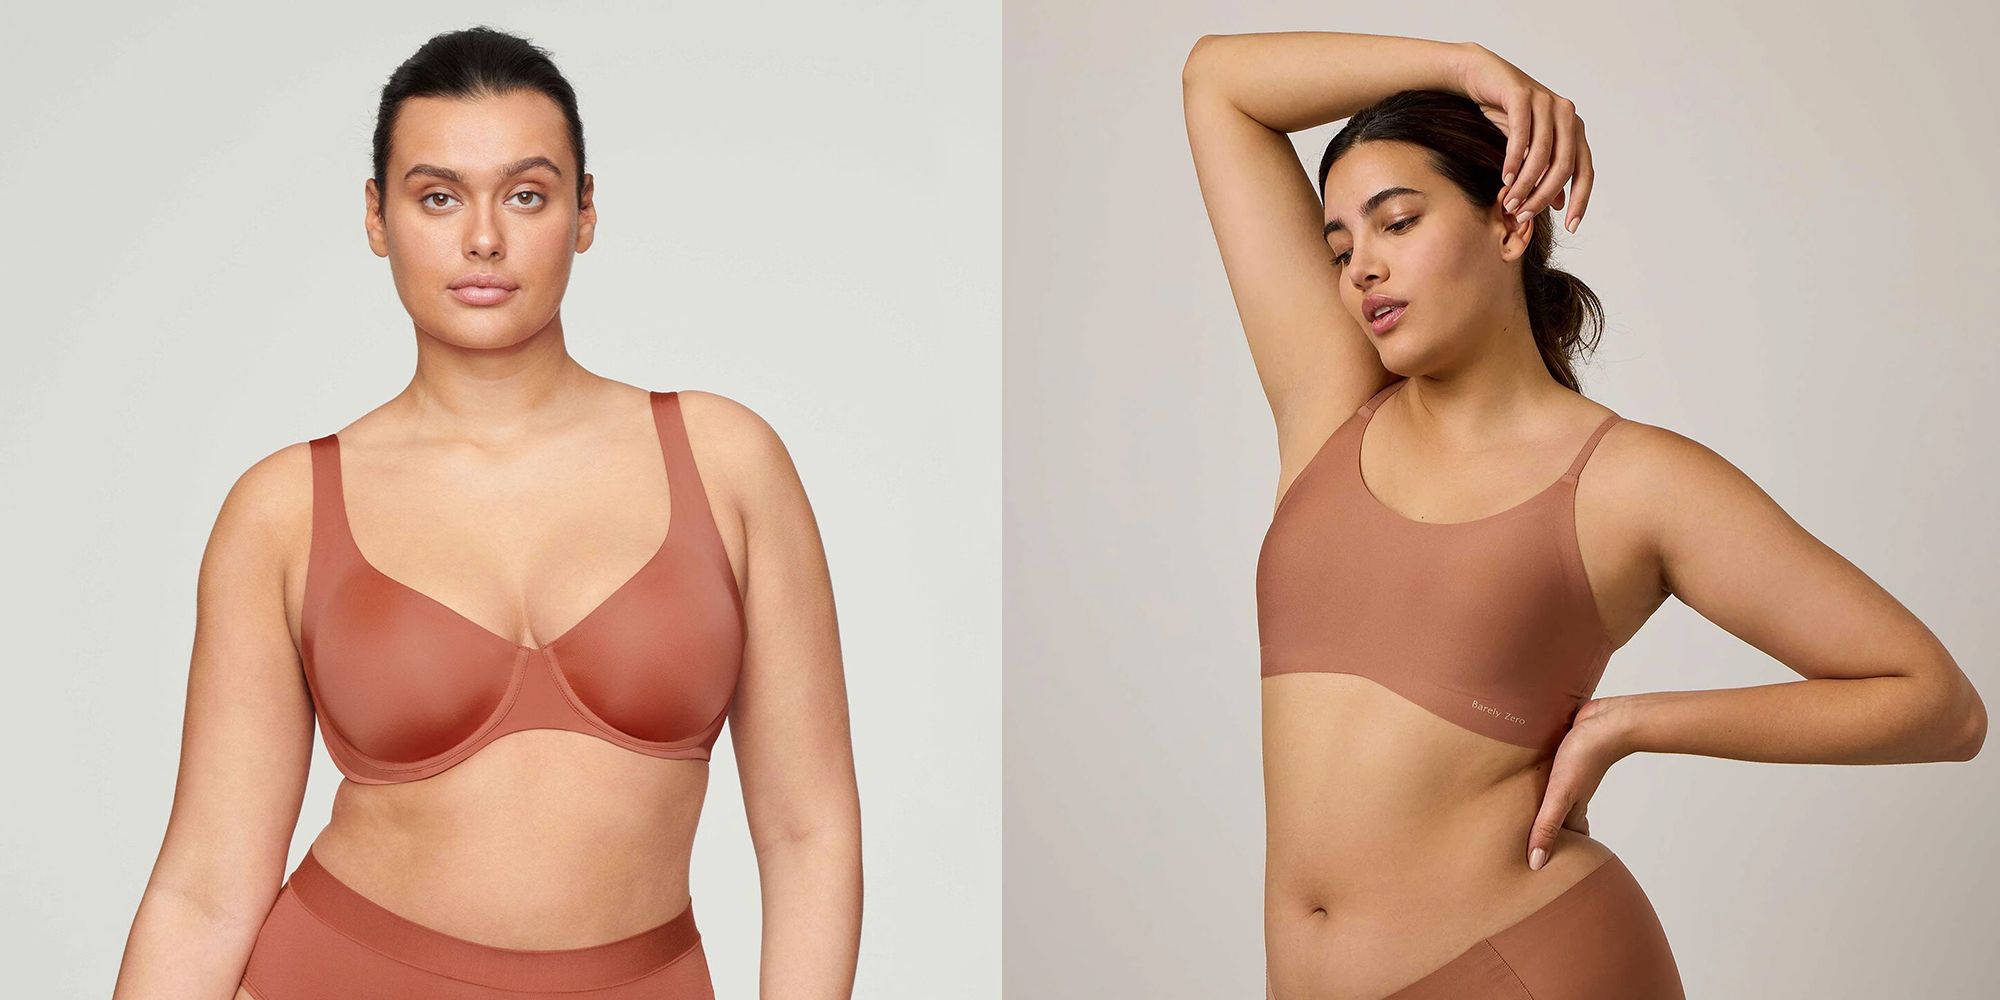 TODAY ONLY - one of the most comfortable bras on earth is ON SALE